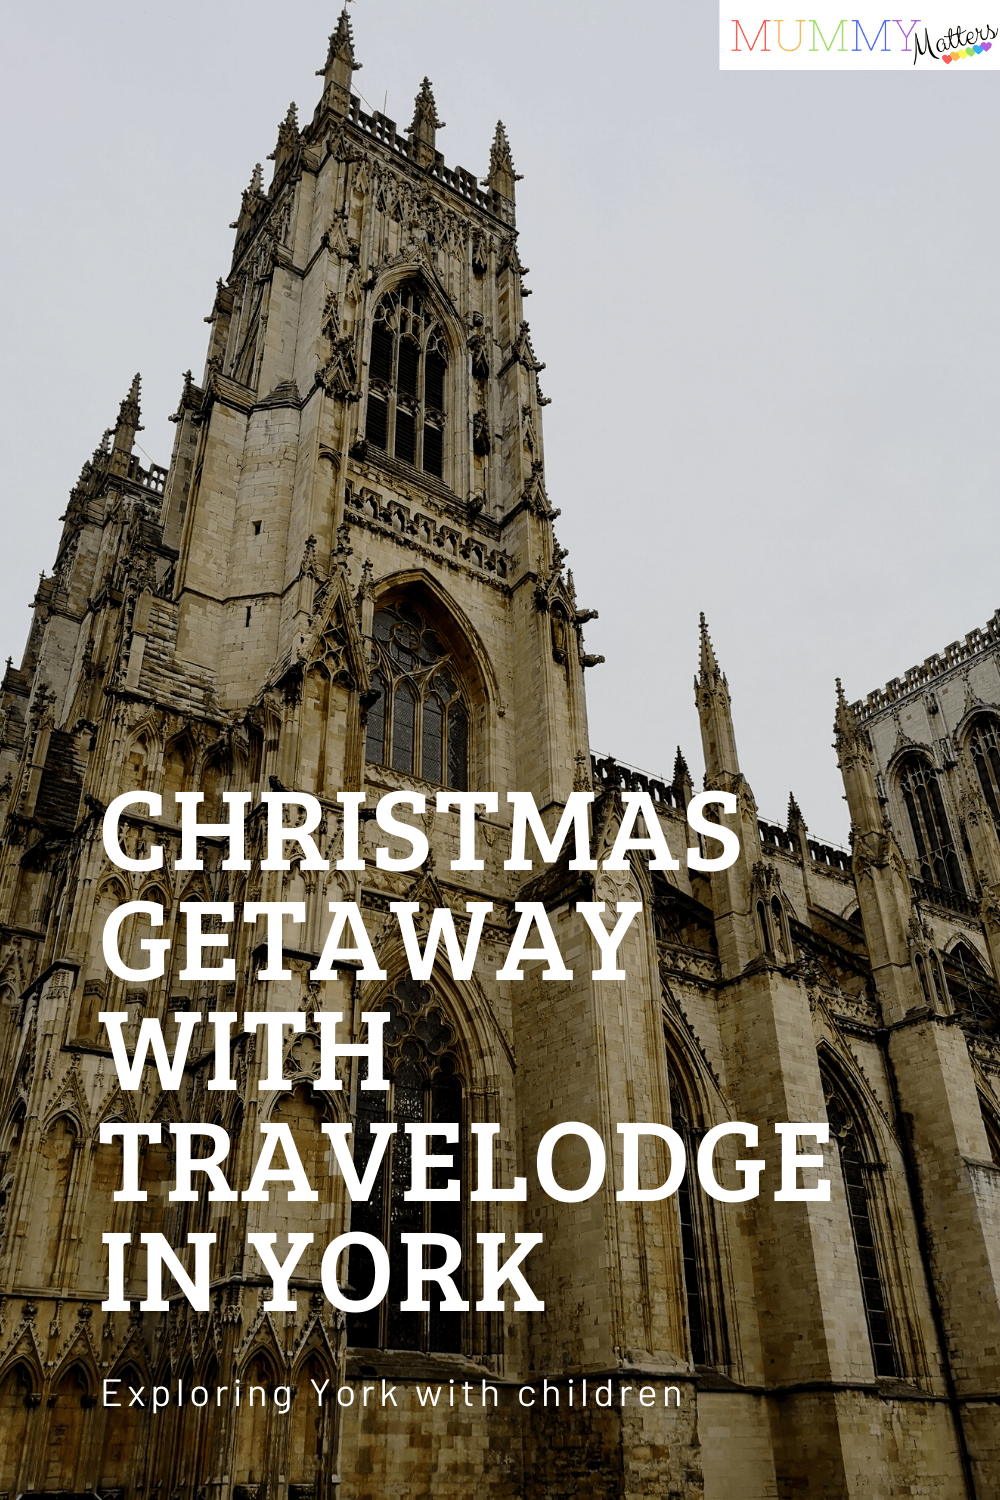 We booked ourselves a Christmas weekend away in York and had lots of fun exploring this historic City. Travelodge provided the perfect base for our family.